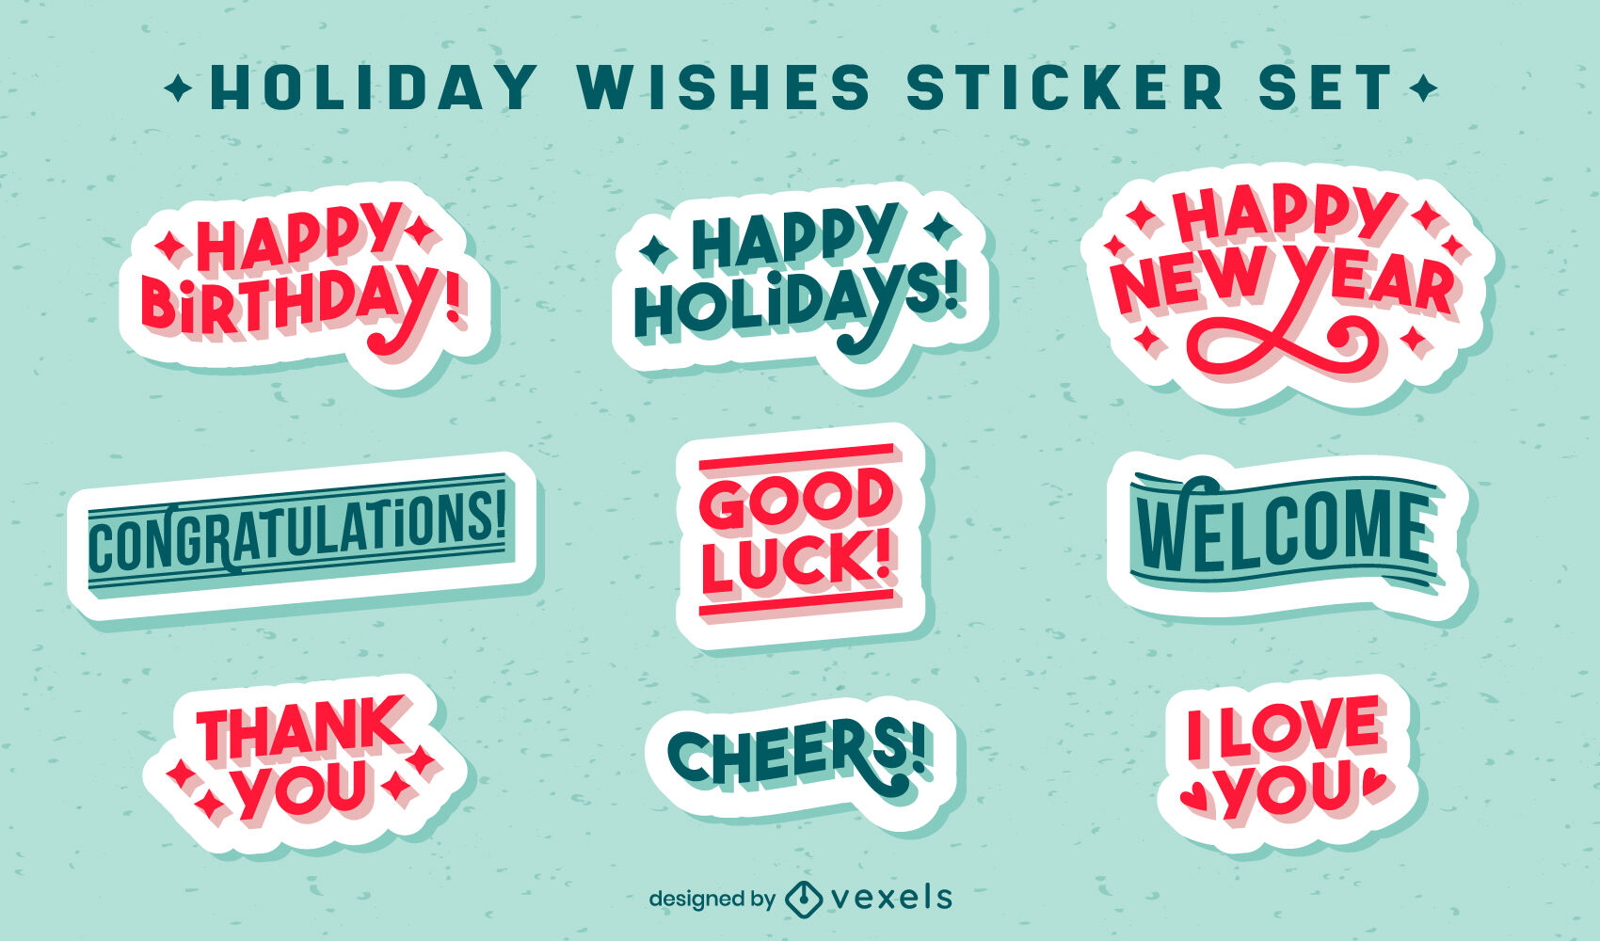 Happy holiday wishes quotes sticker set